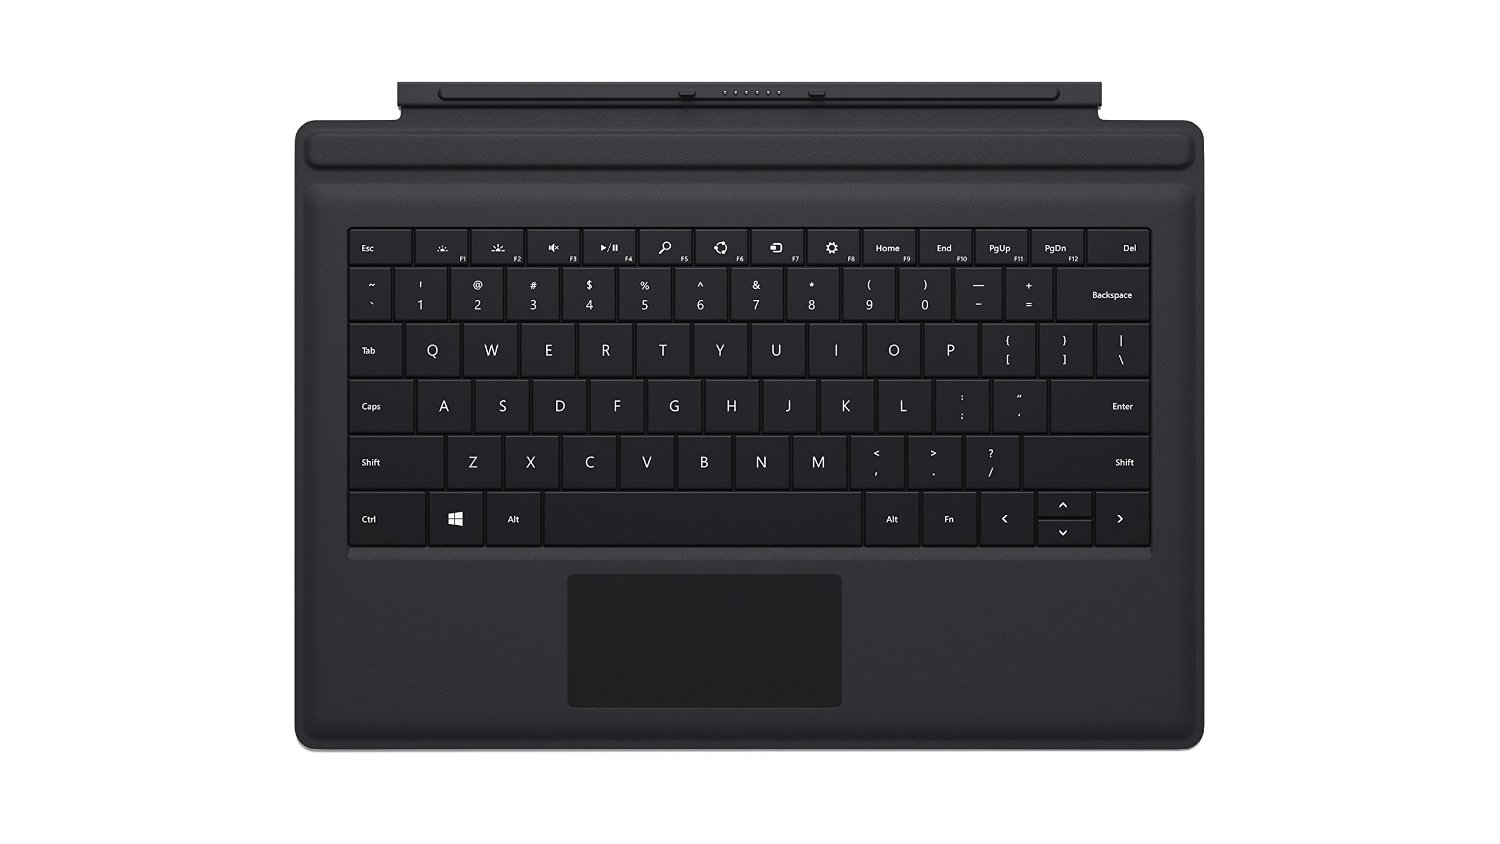 Microsoft Surface Pro 3 Type Cover